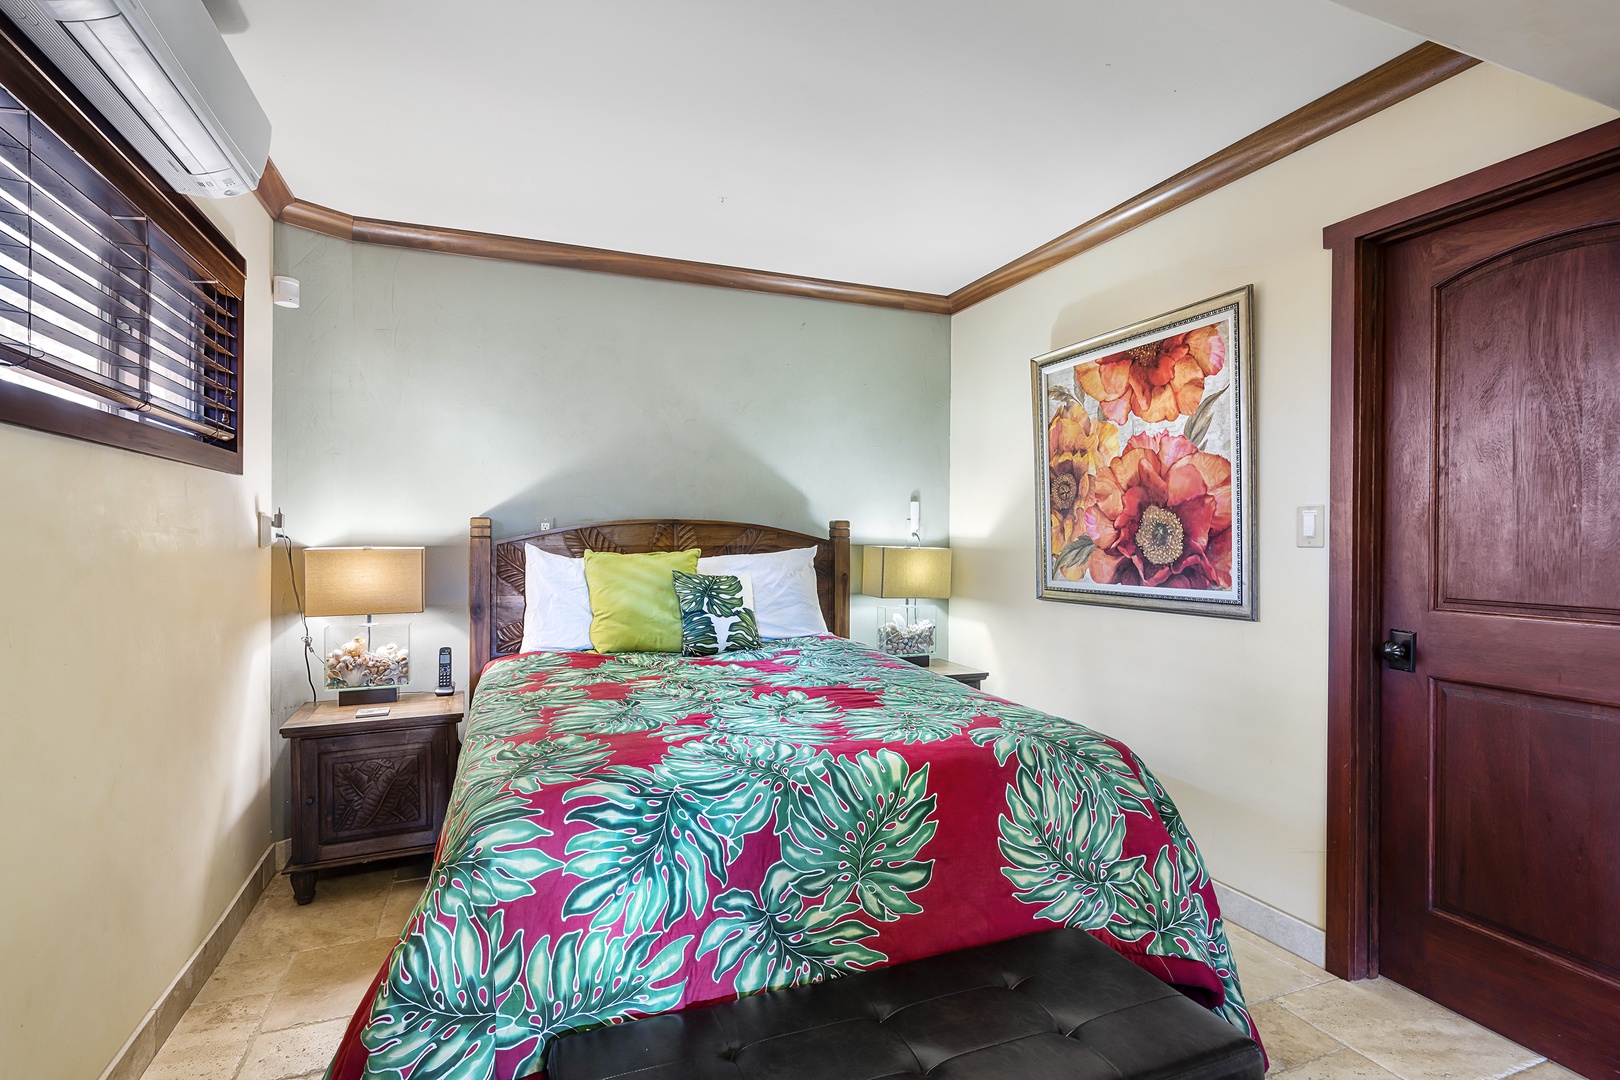 Kailua Kona Vacation Rentals, Mermaid Cove - Downstairs detached bedroom with A/C, and TV